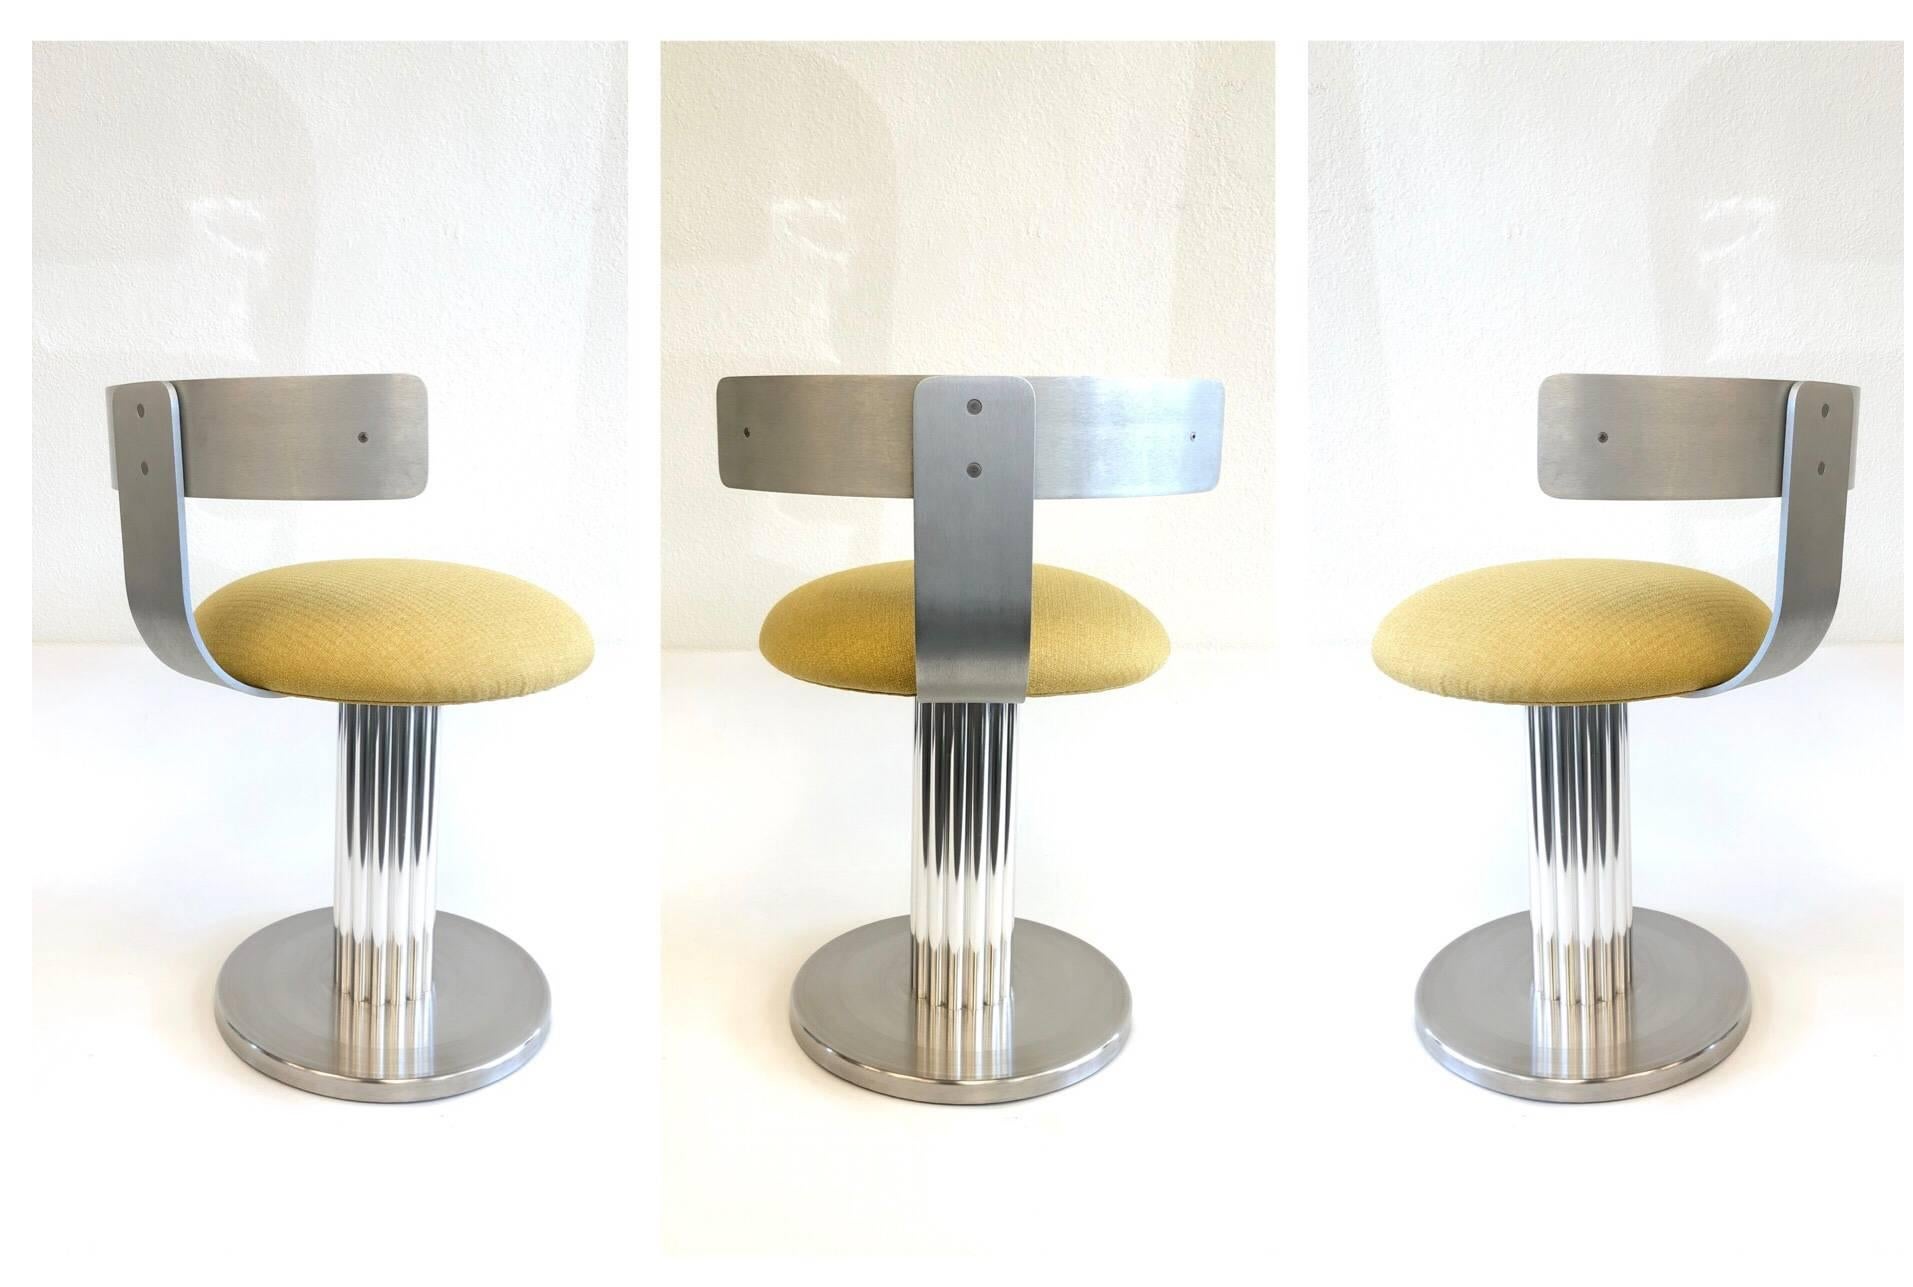 A set of three aluminium and stainless steel swivel stools by Design For Leisure Ltd. This are from the 1980s newly recovered in a beautiful yellow fabric. The stools are constructed of stainless steel and aluminium. The backrest is brush aluminium,